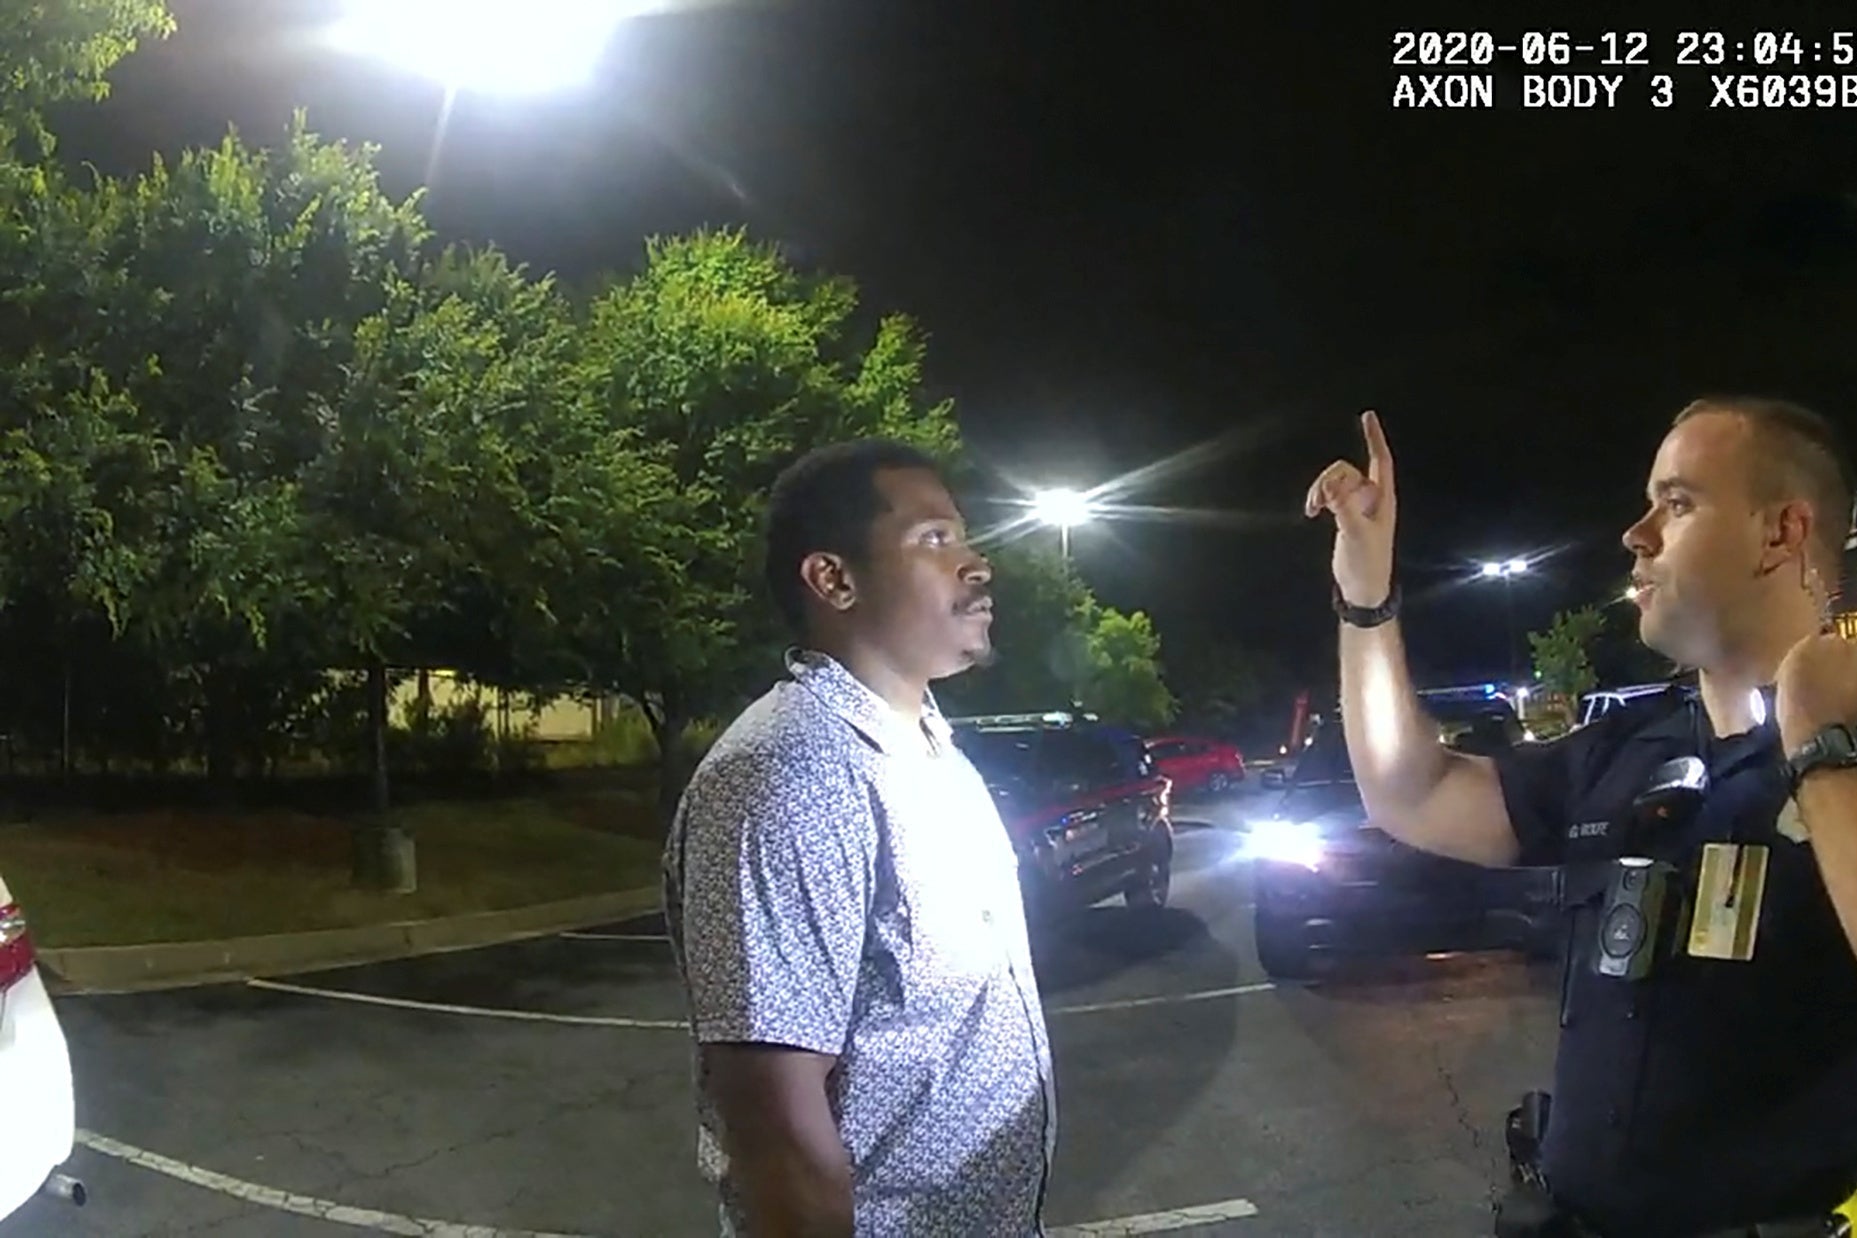 Rolfe raises his index finger in front of Brooks' face during a sobriety test